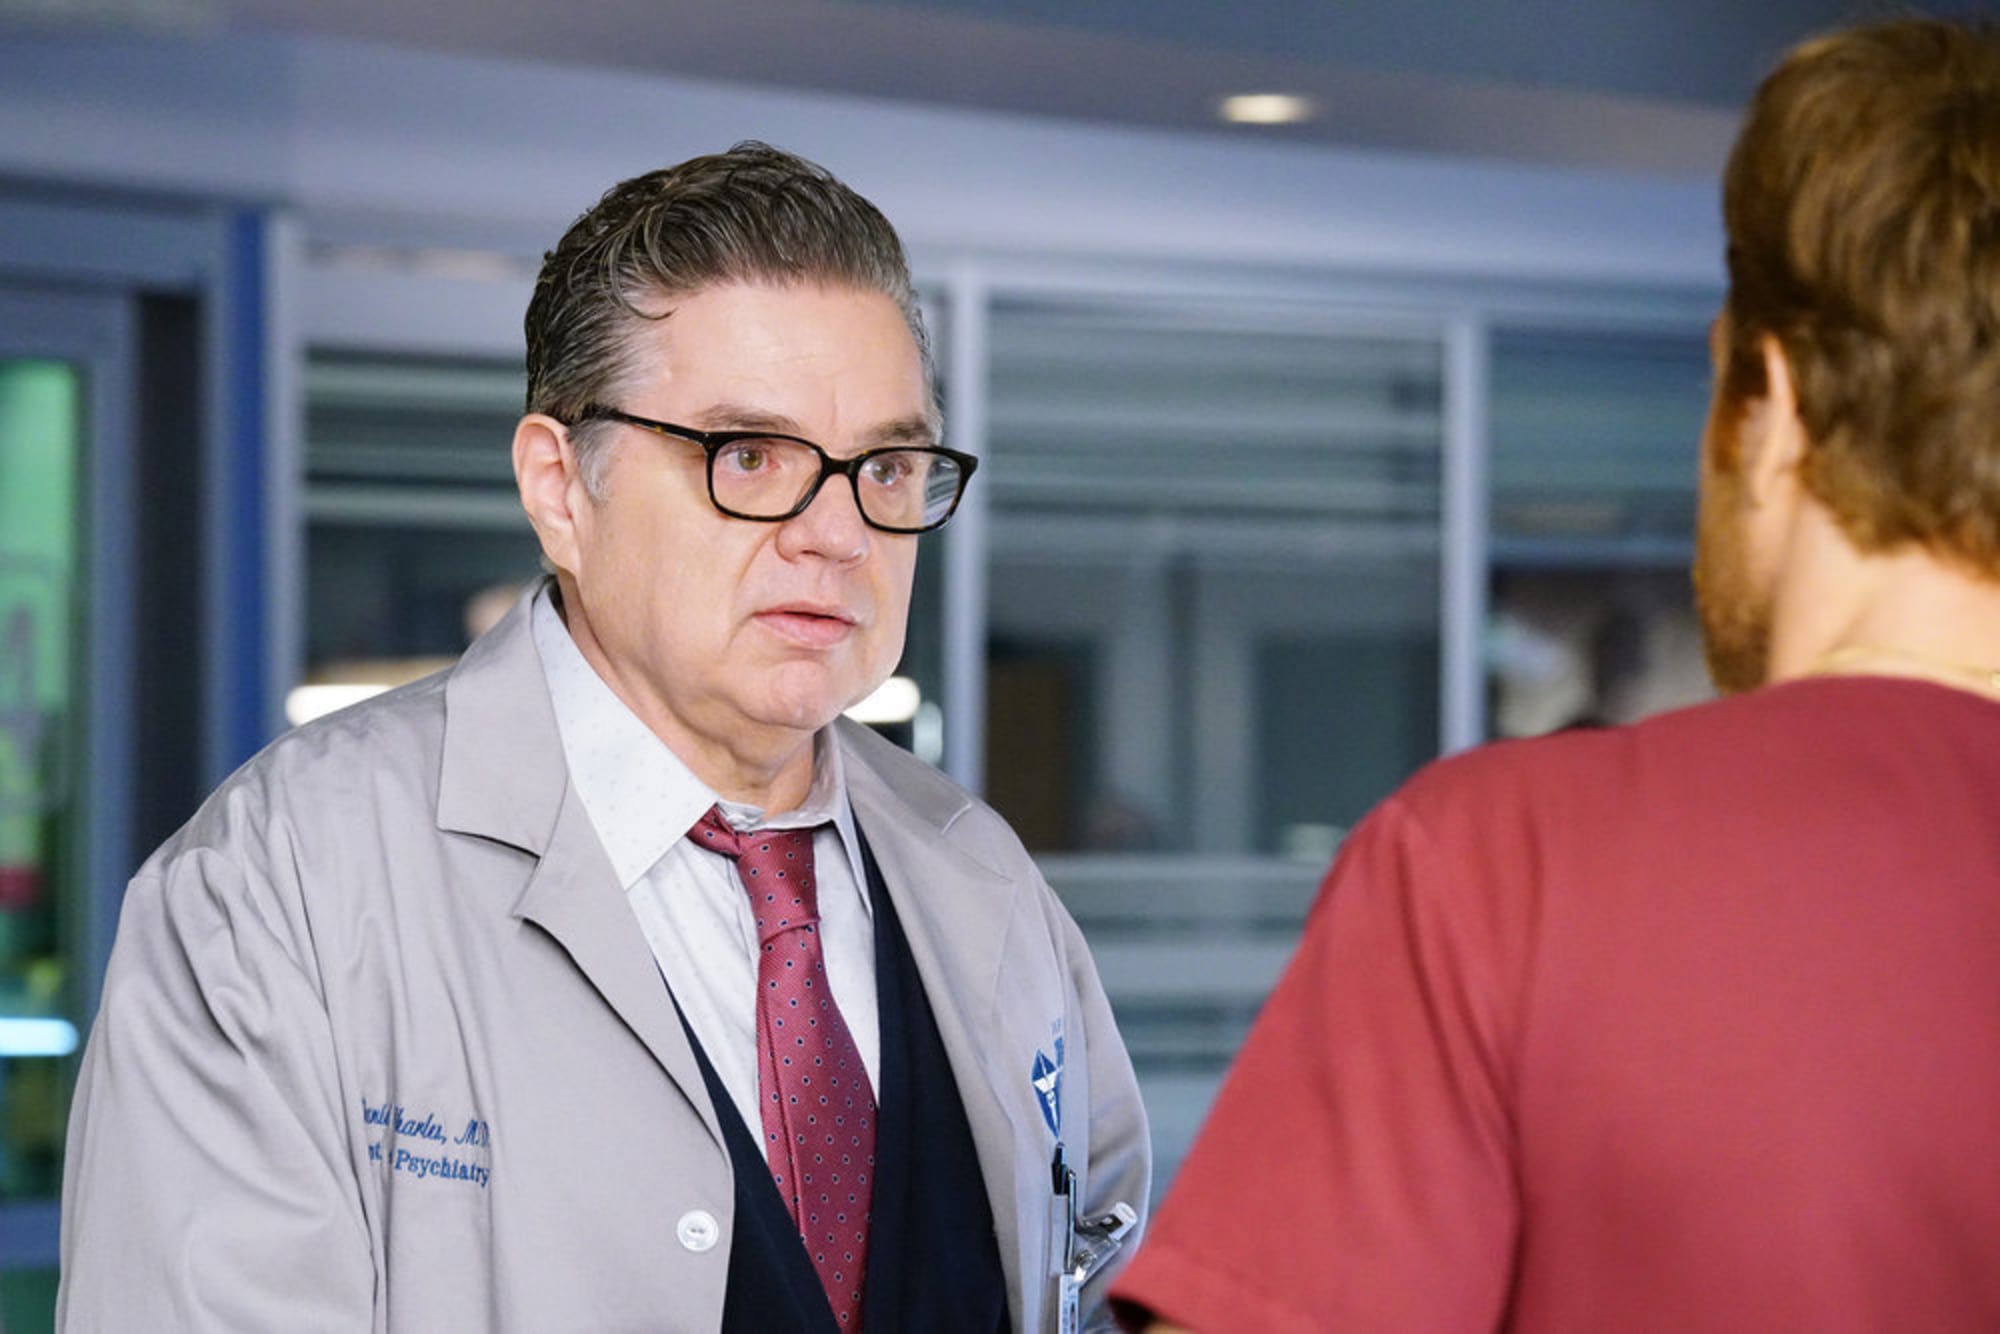 Chicago Med s5e12 photos: Leave the Choice to Solomon